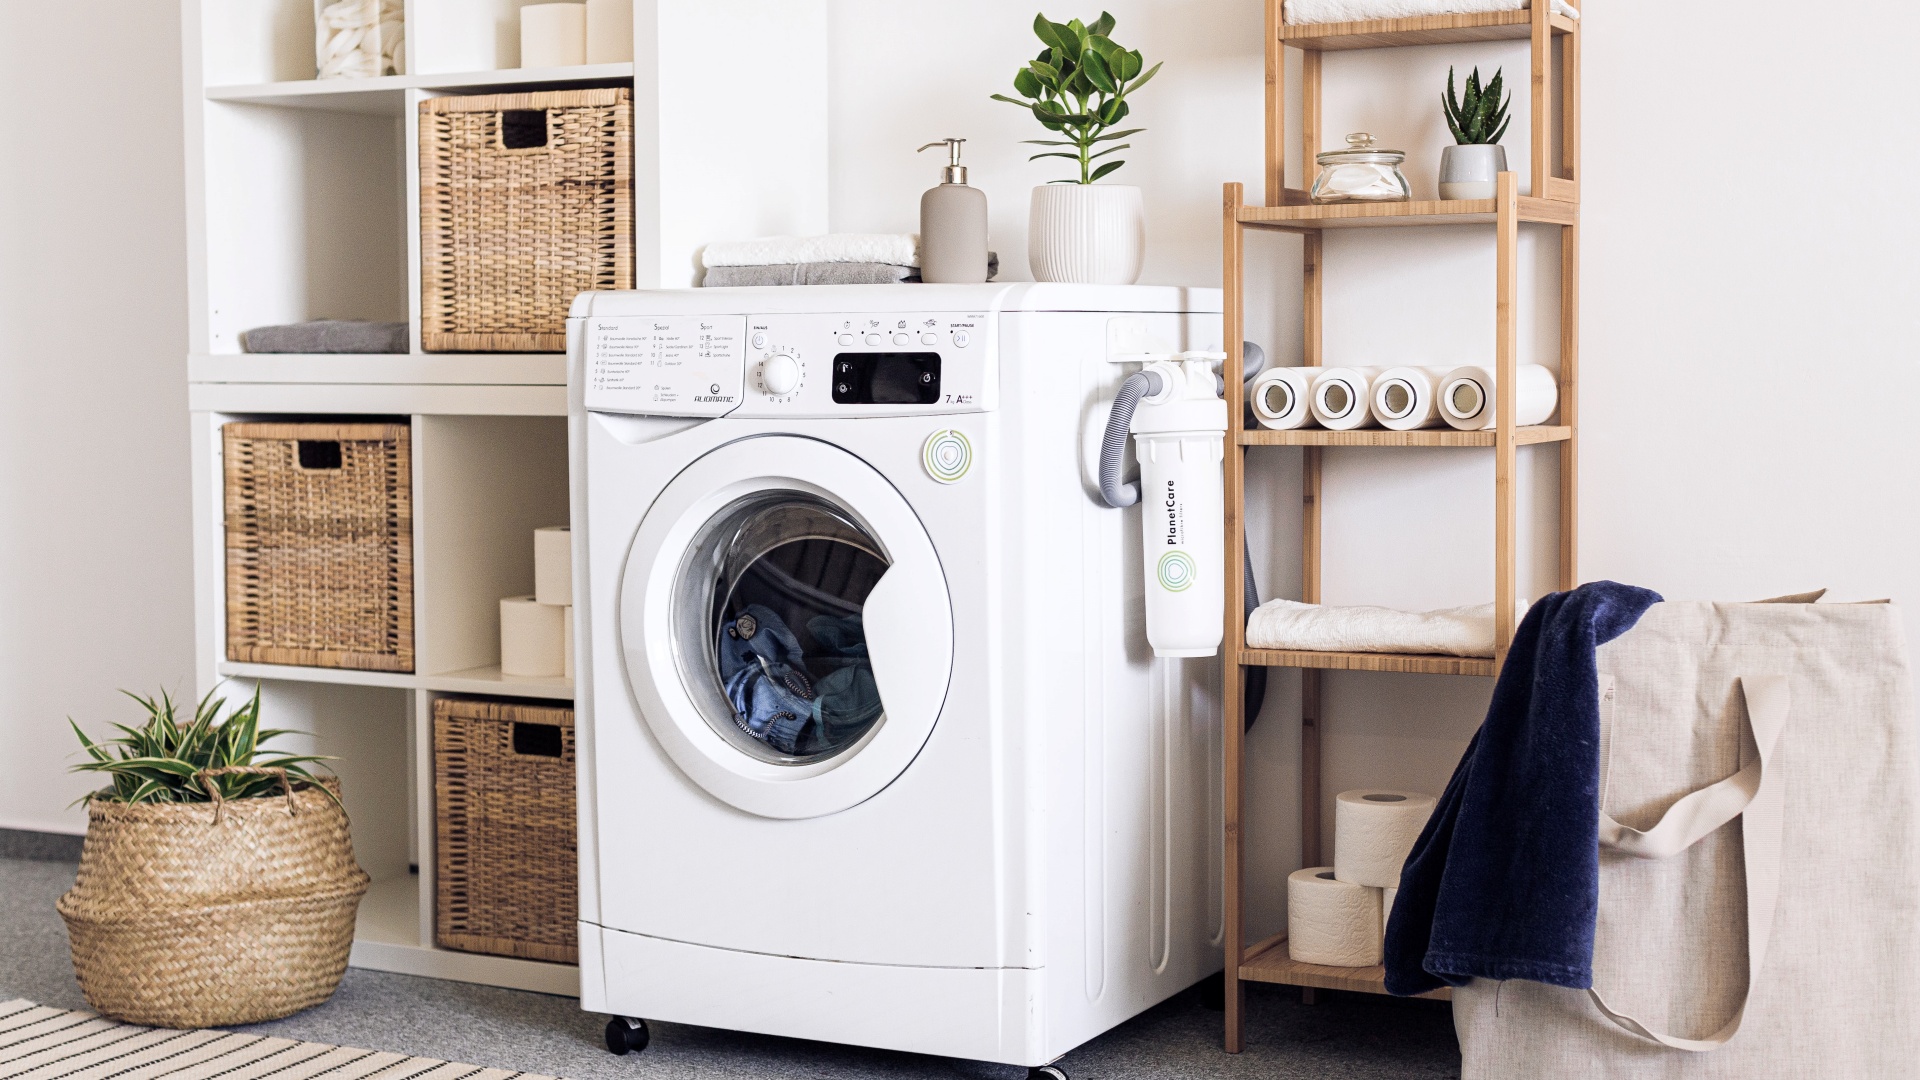 How to Utilize Small Space for Laundry Room in a Tiny House ...